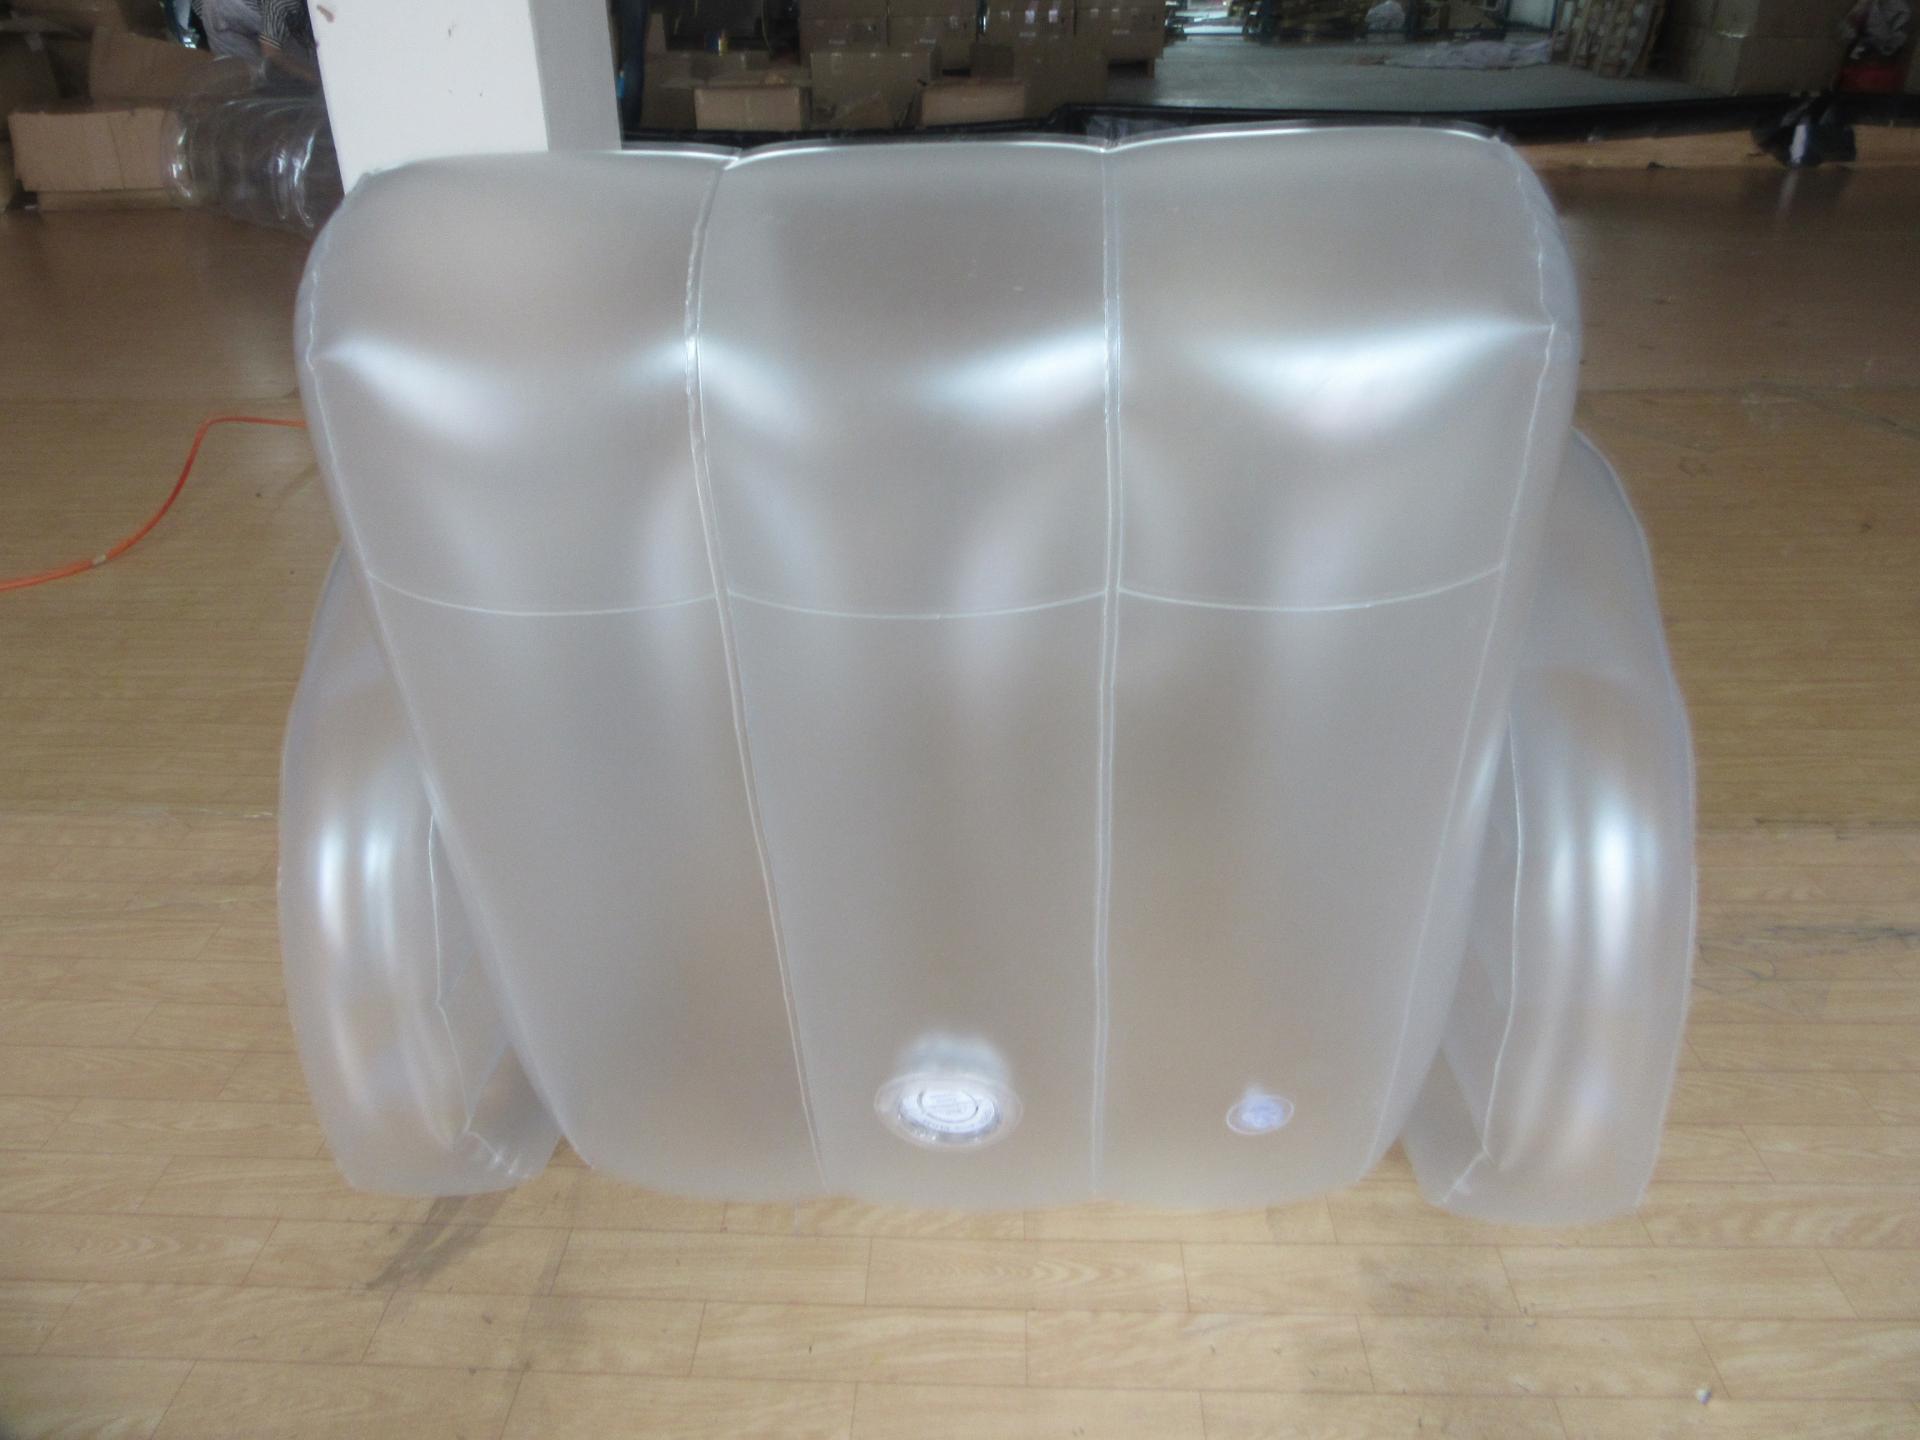 Customised One Seat Led Inflatable Sofa Chair With Armrest And Cup Holder For Indoor And Outdoor